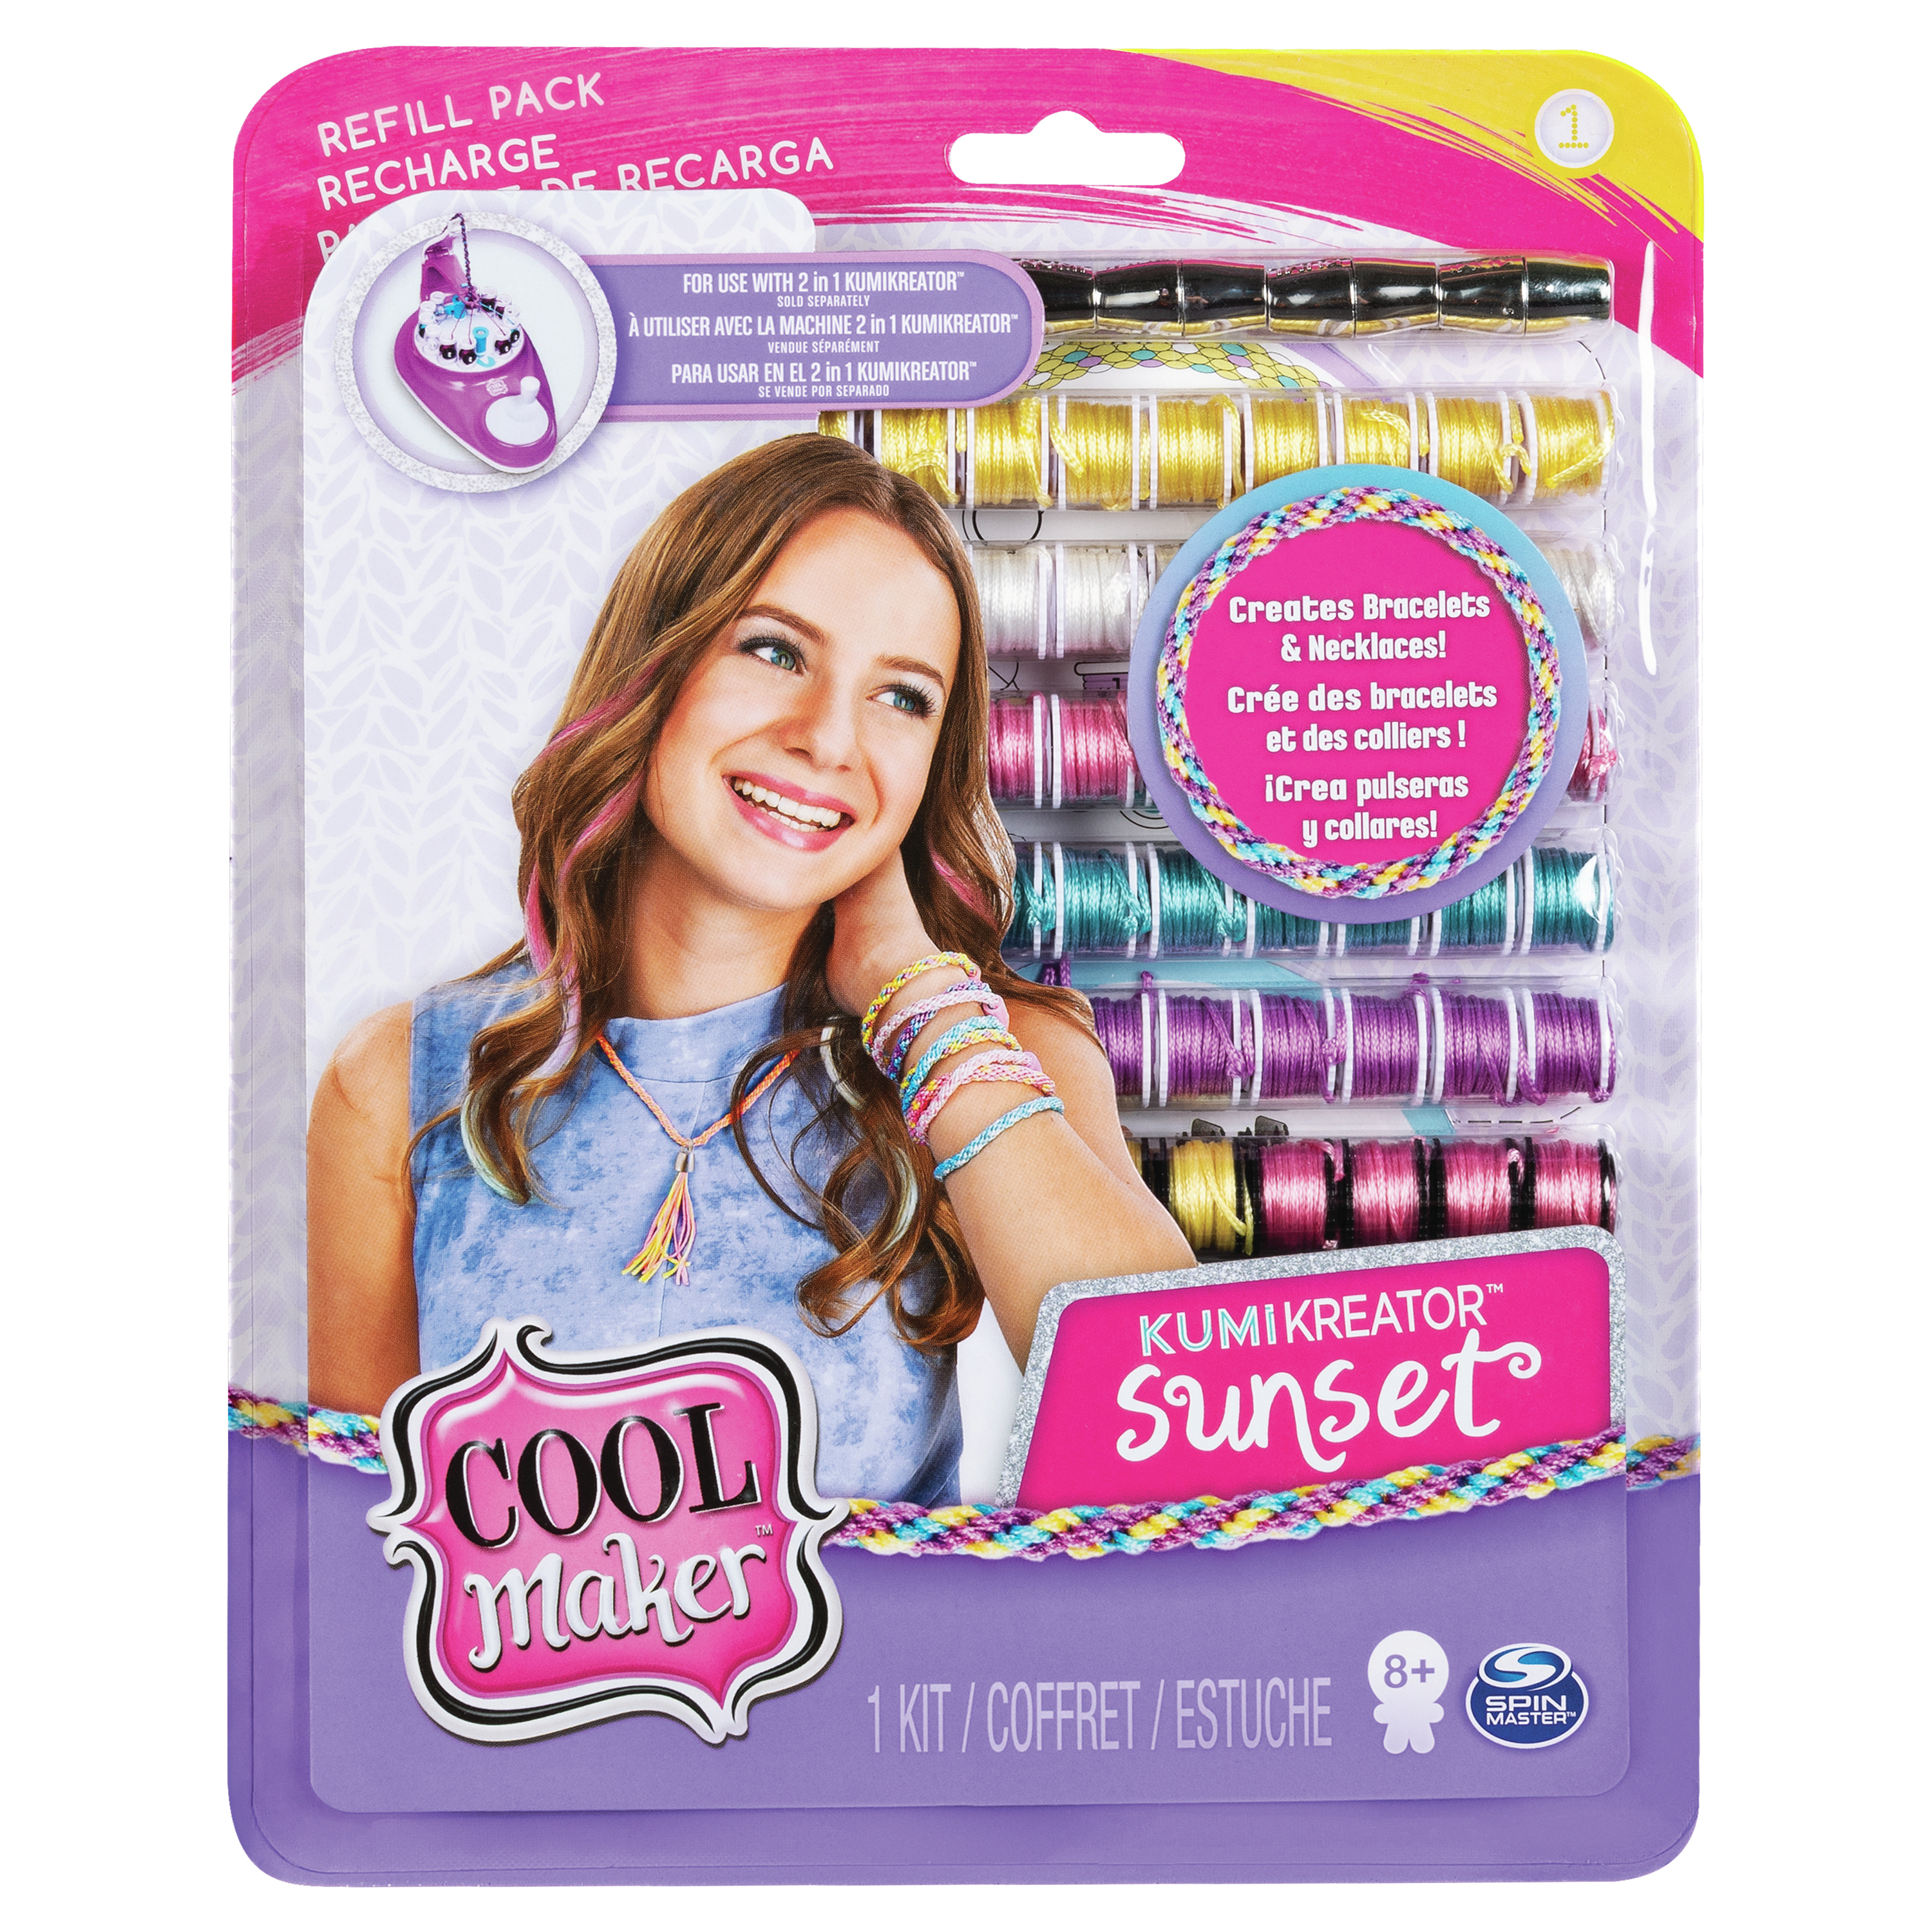 Cool Maker – KumiColors Jewels & Cools Fashion Pack, Makes Up to